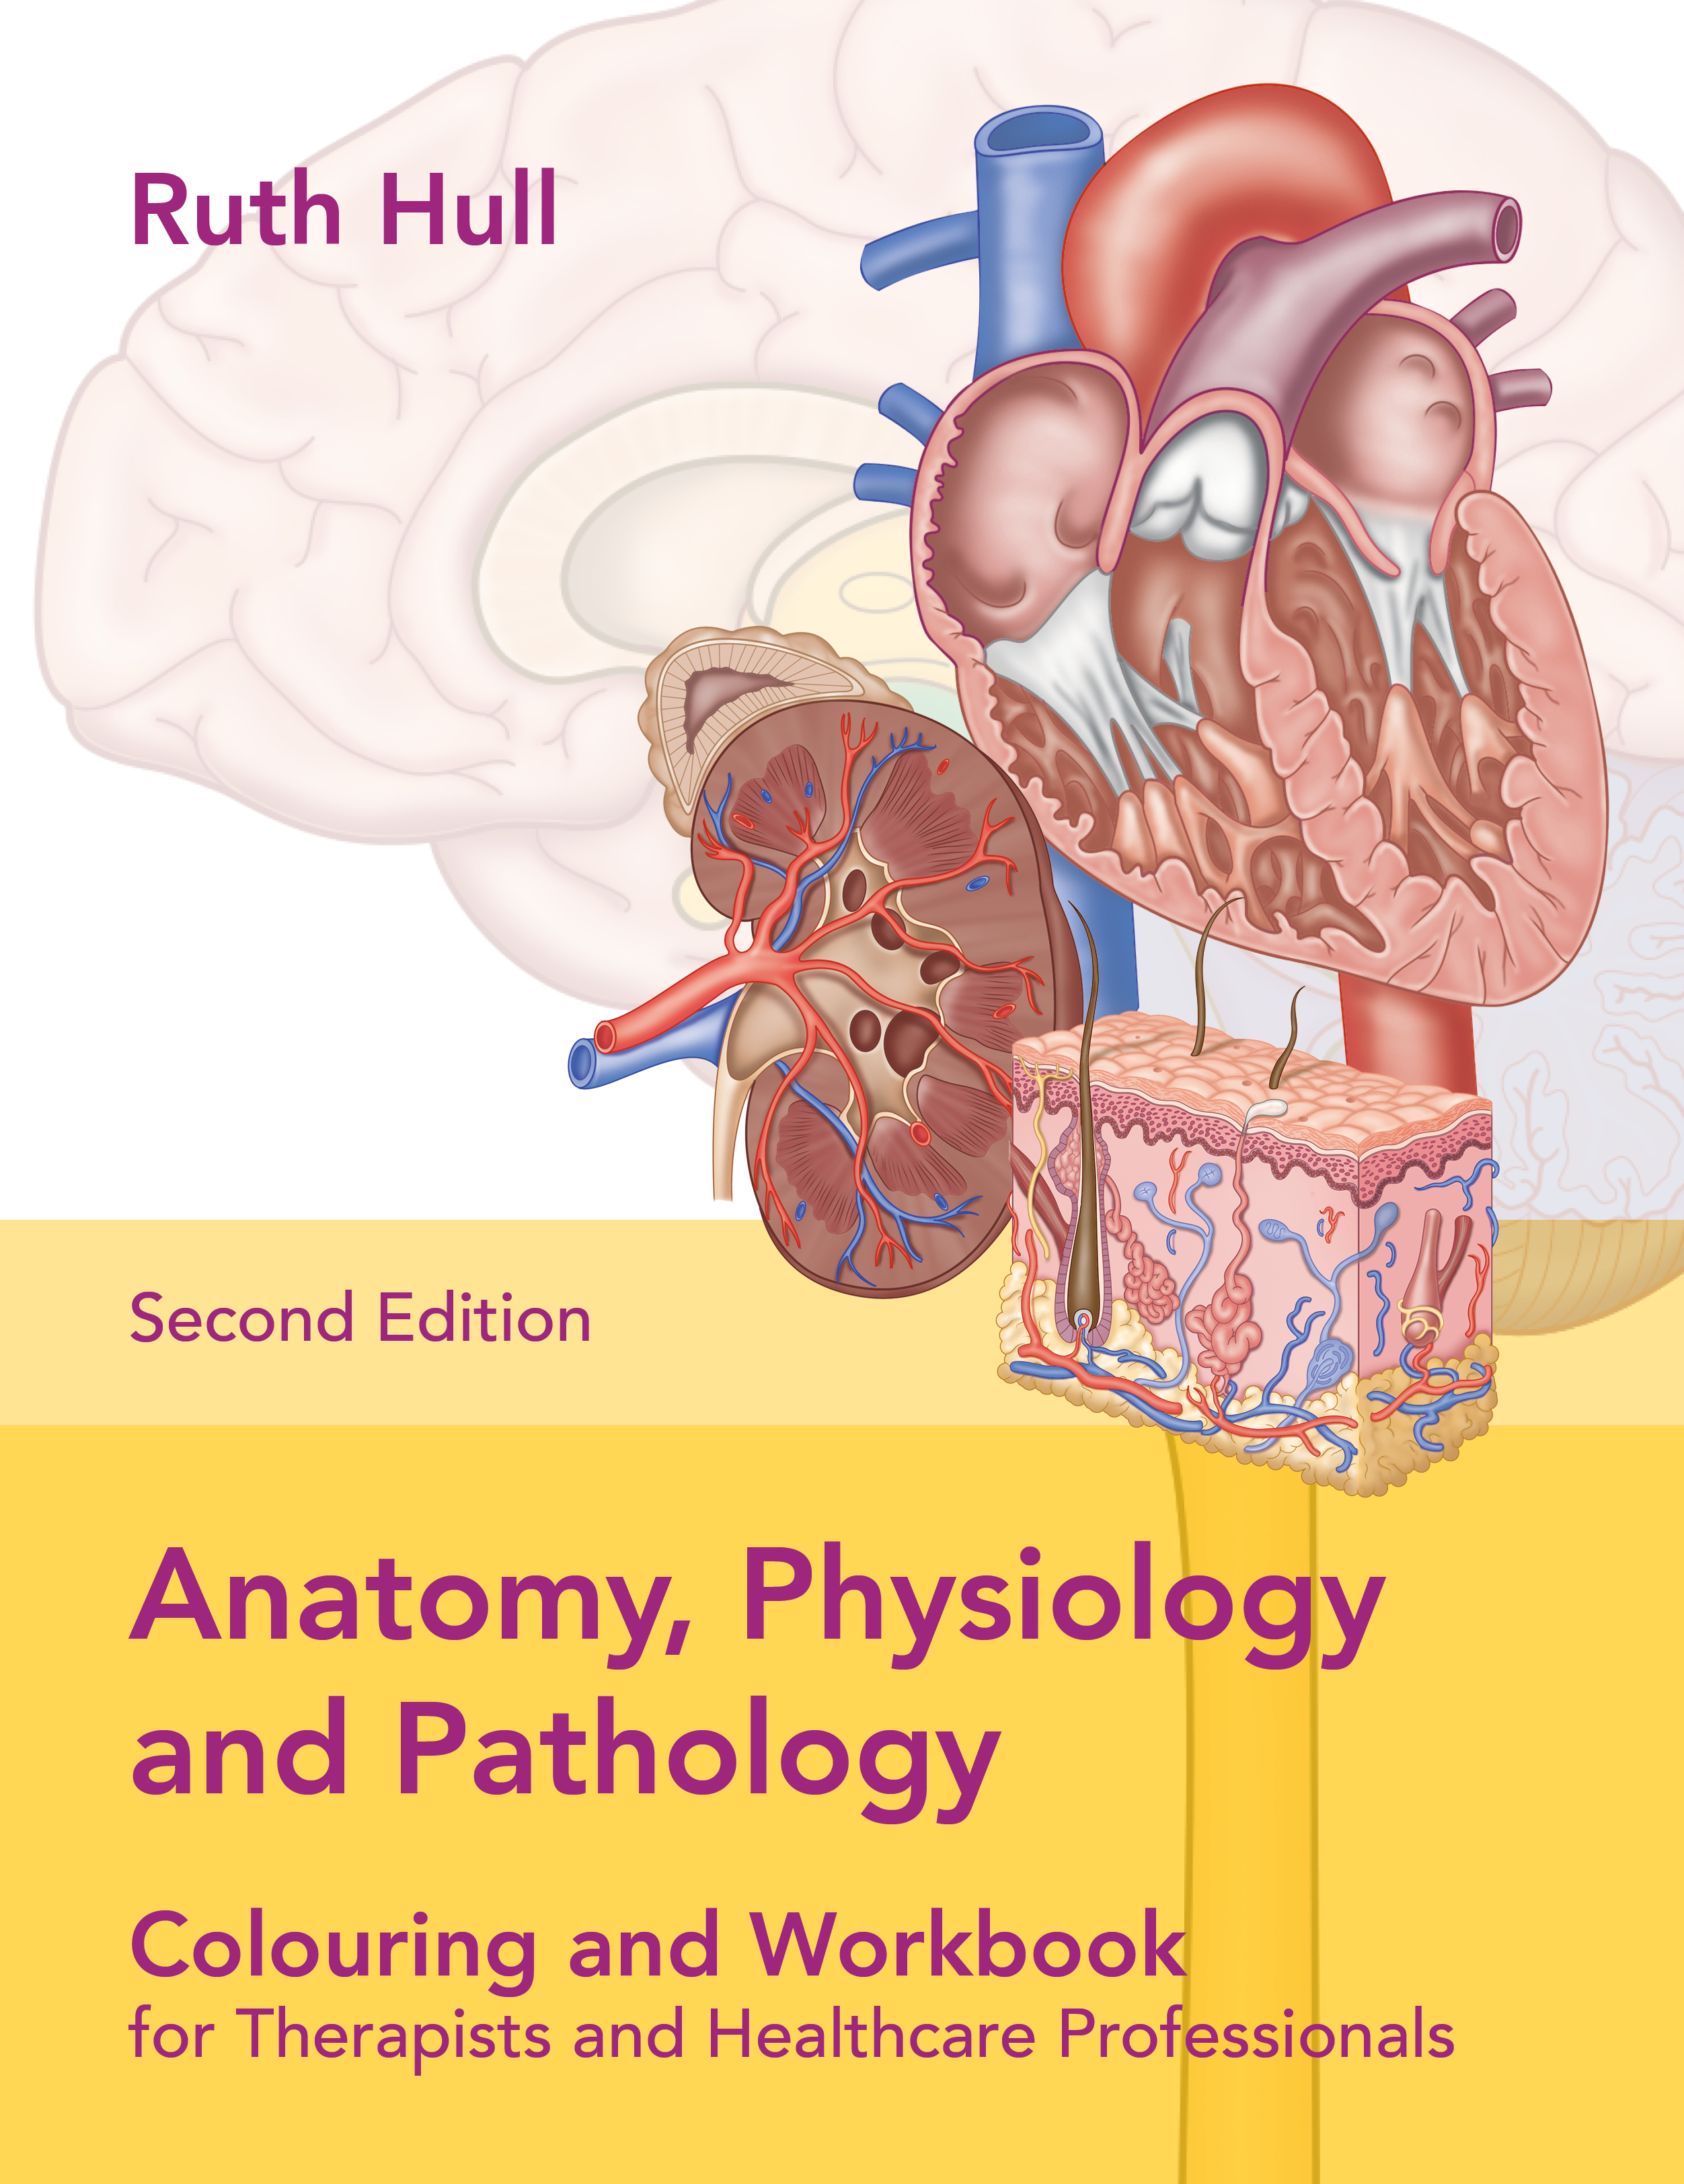 Anatomy, Physiology and Pathology Colouring and Workbook for Therapists and Healthcare Professionals, 2nd ed